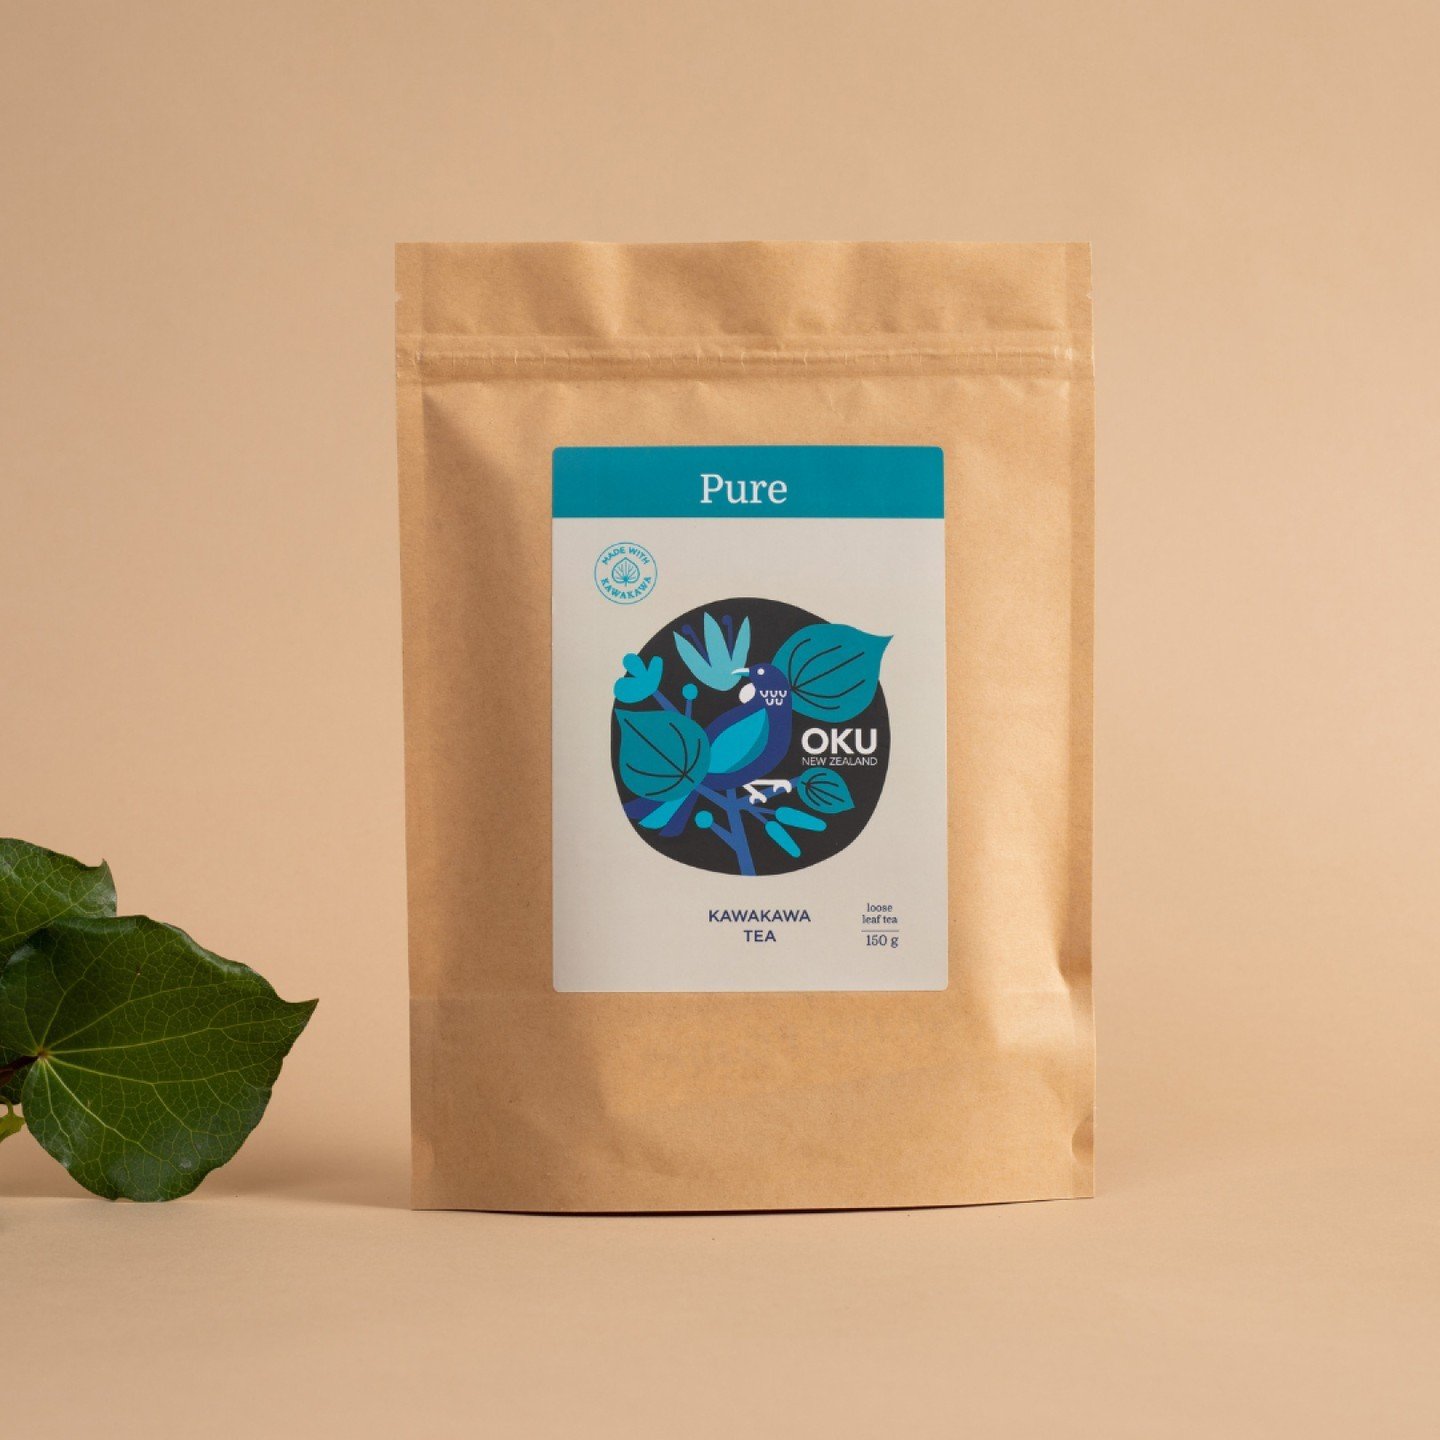 Did you know that you can order your favourite ŌKU tea in a convenient 150g pouch? 

Say goodbye to running out of your beloved blend too soon &ndash; our larger pouch size ensures you'll have plenty of tea to savour every soothing sip. Elevate your 